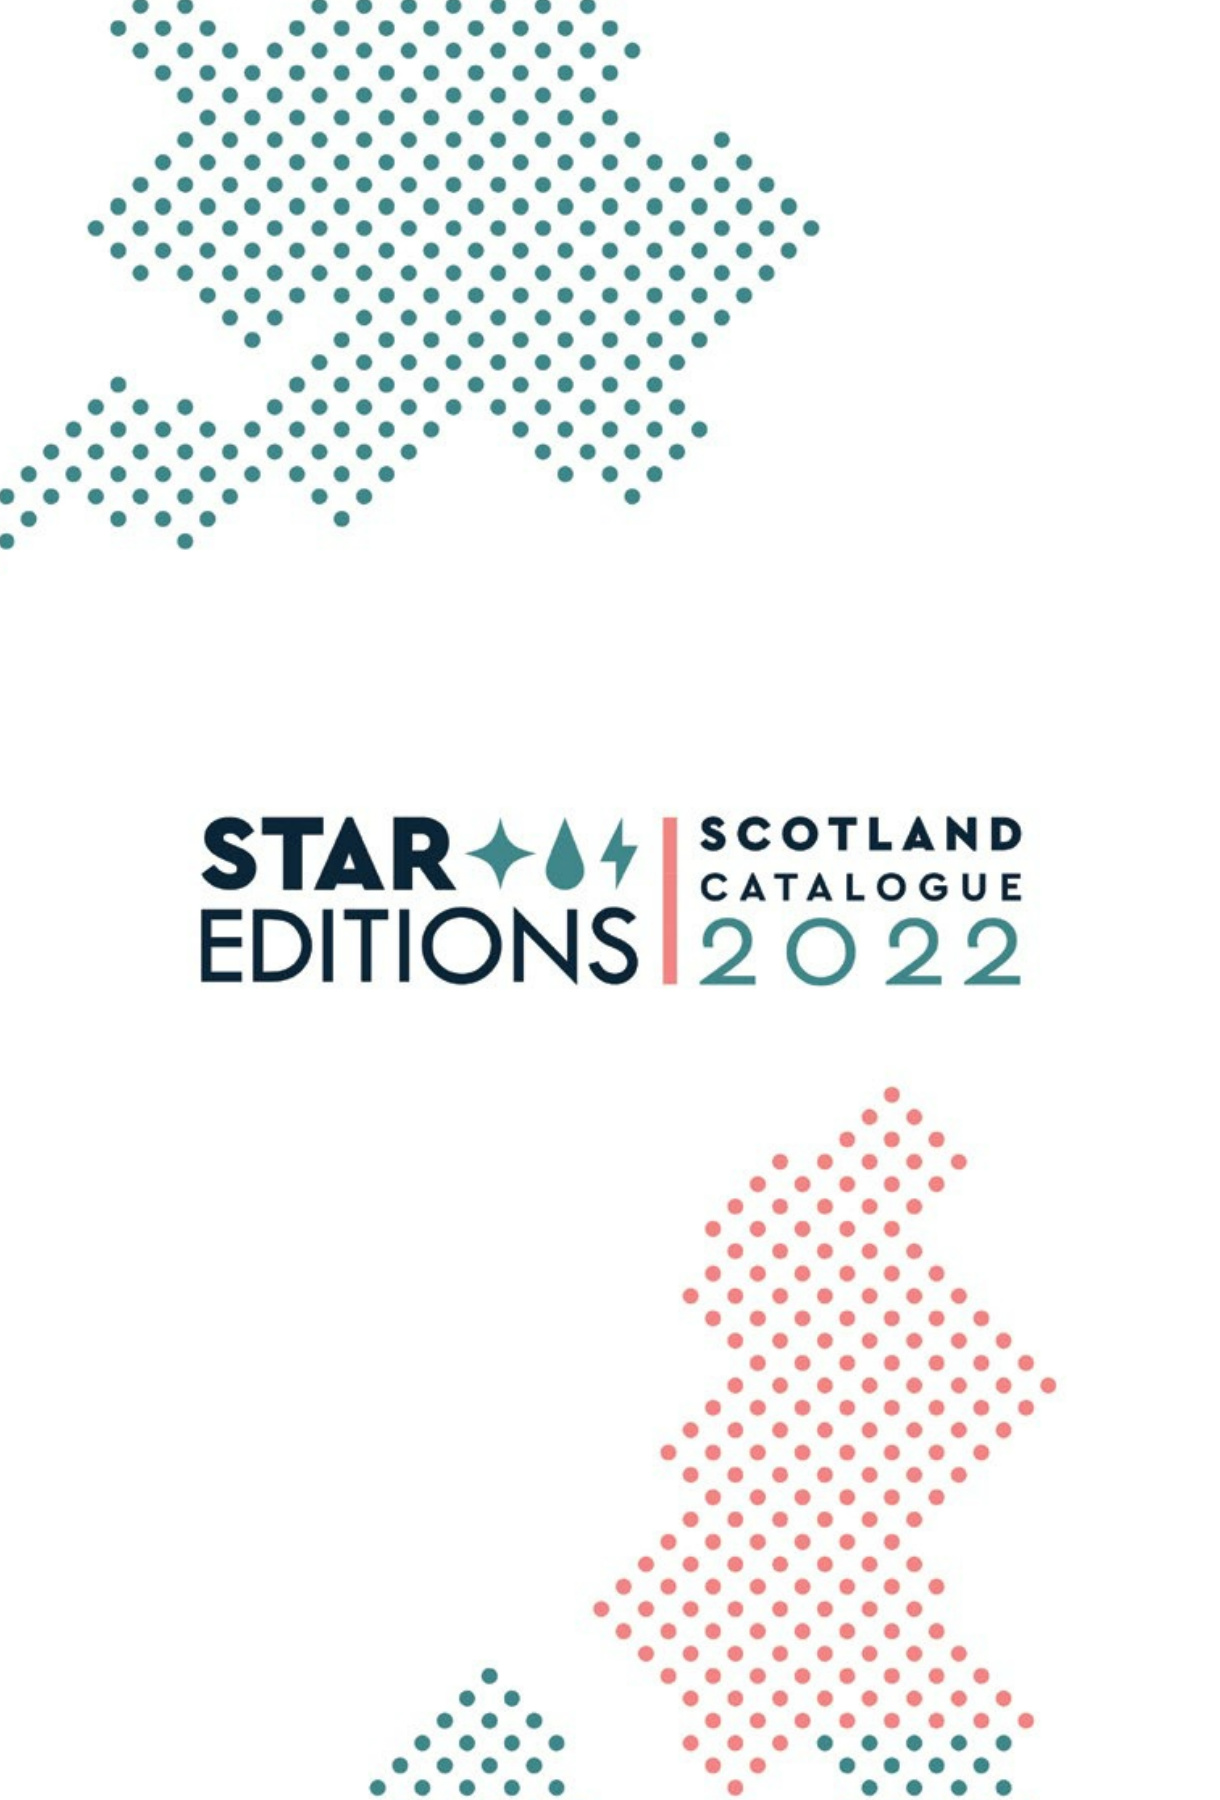 Star Editions Scotland Product Catalogue